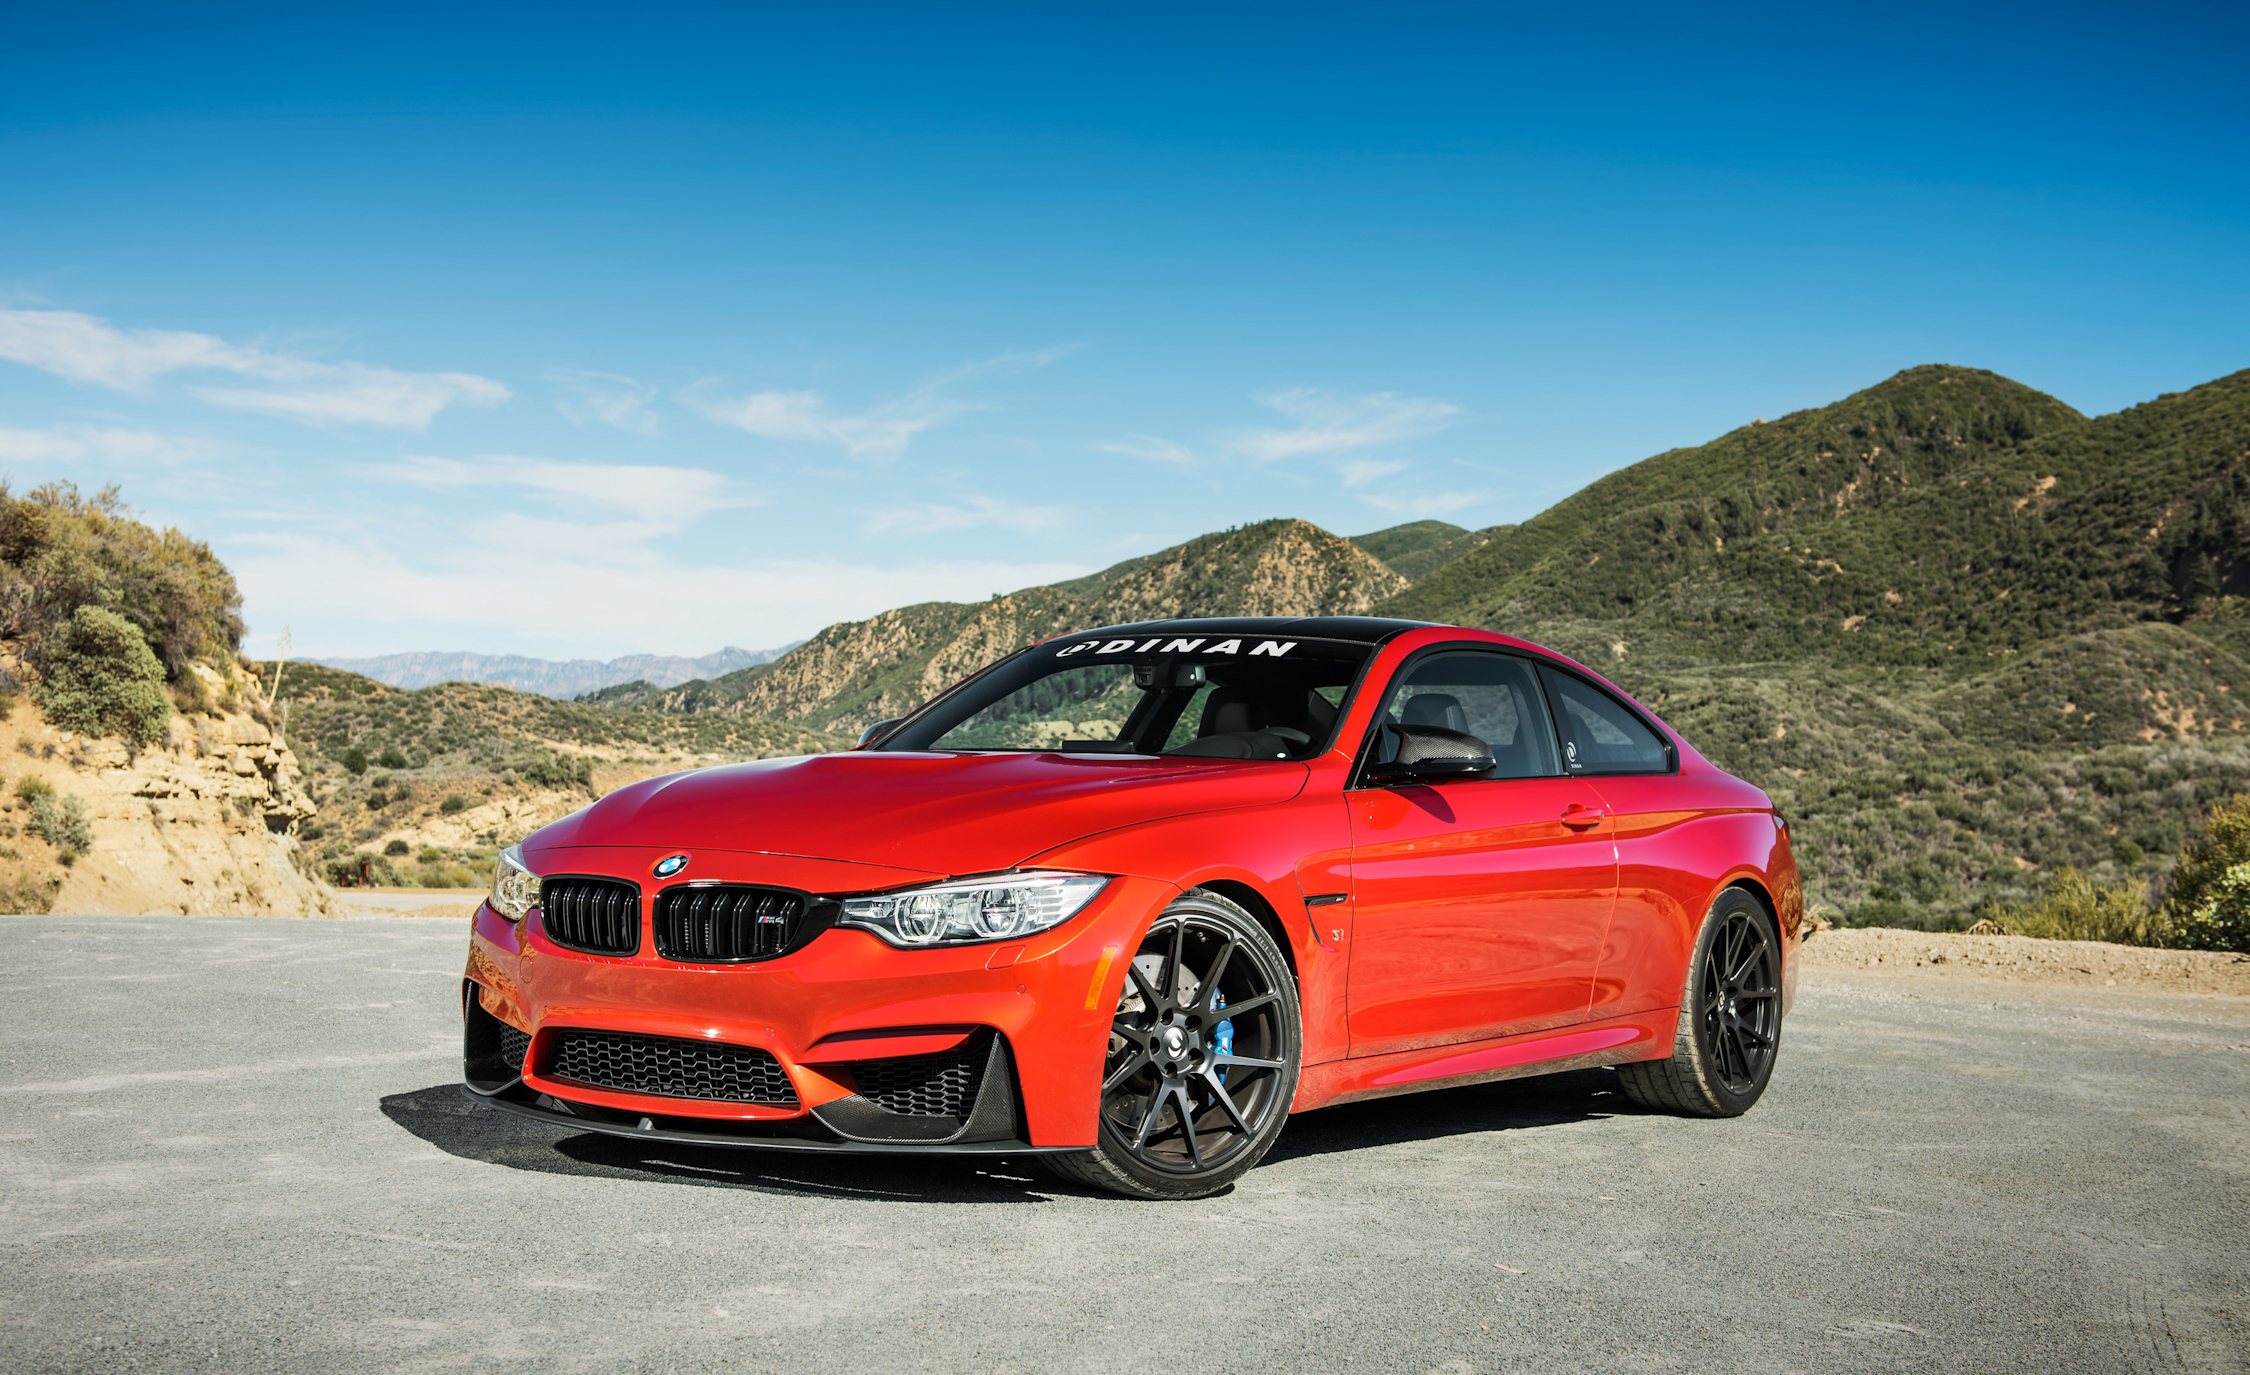 BMW M4 Wallpapers, Pictures, Images